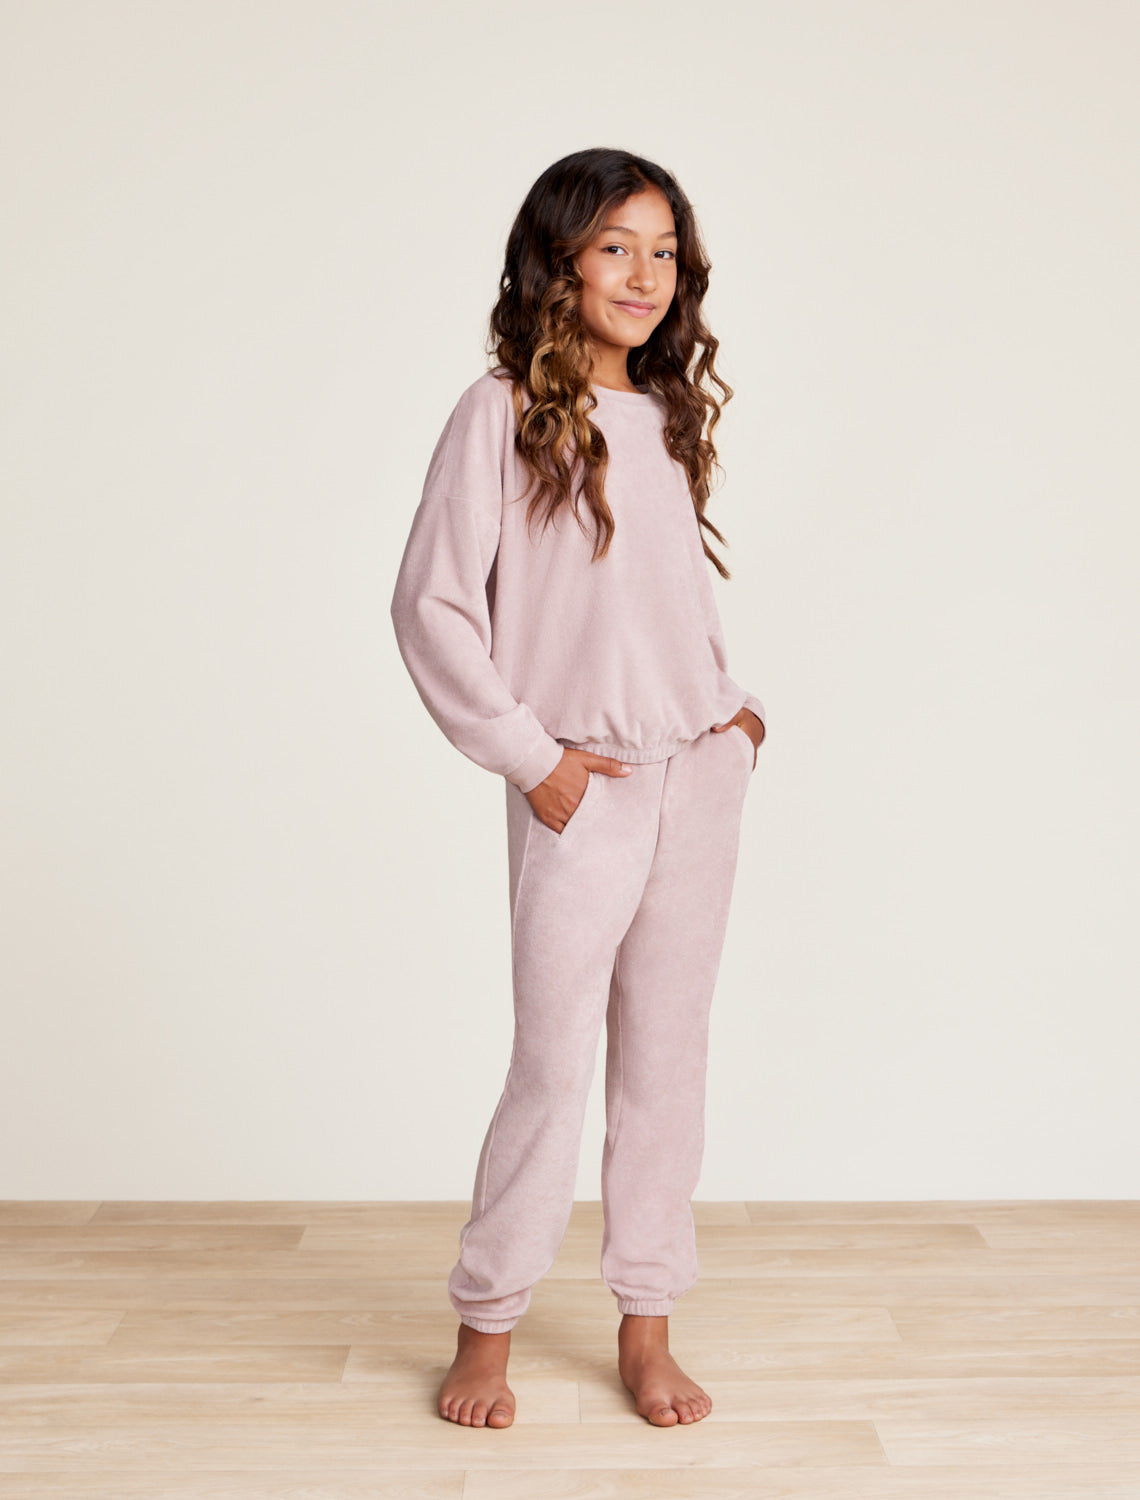 Youth - New Arrivals | Barefoot Dreams® Official Site - Loungewear,  Apparel, Blankets